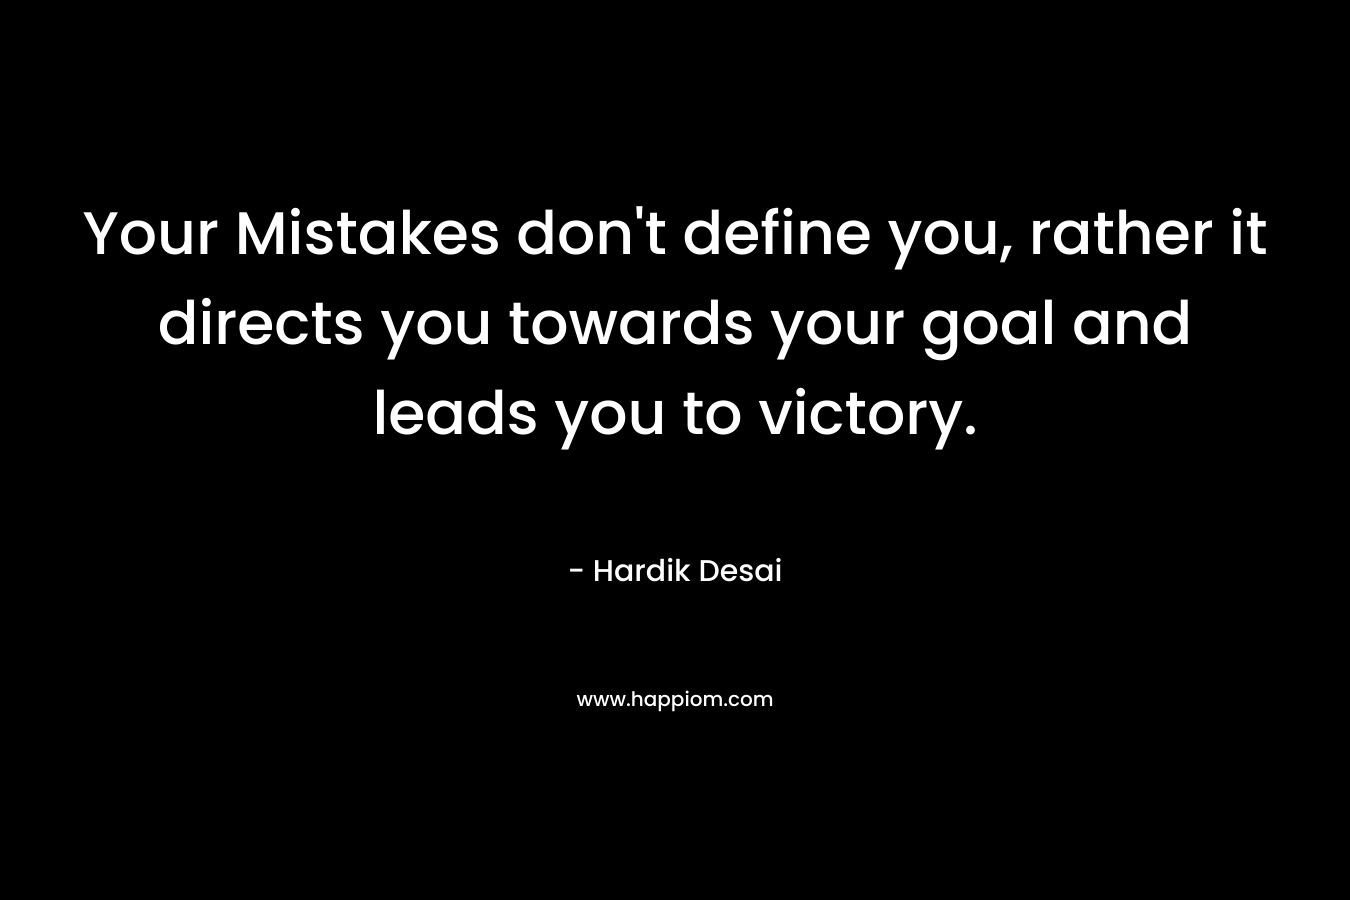 Your Mistakes don’t define you, rather it directs you towards your goal and leads you to victory. – Hardik Desai